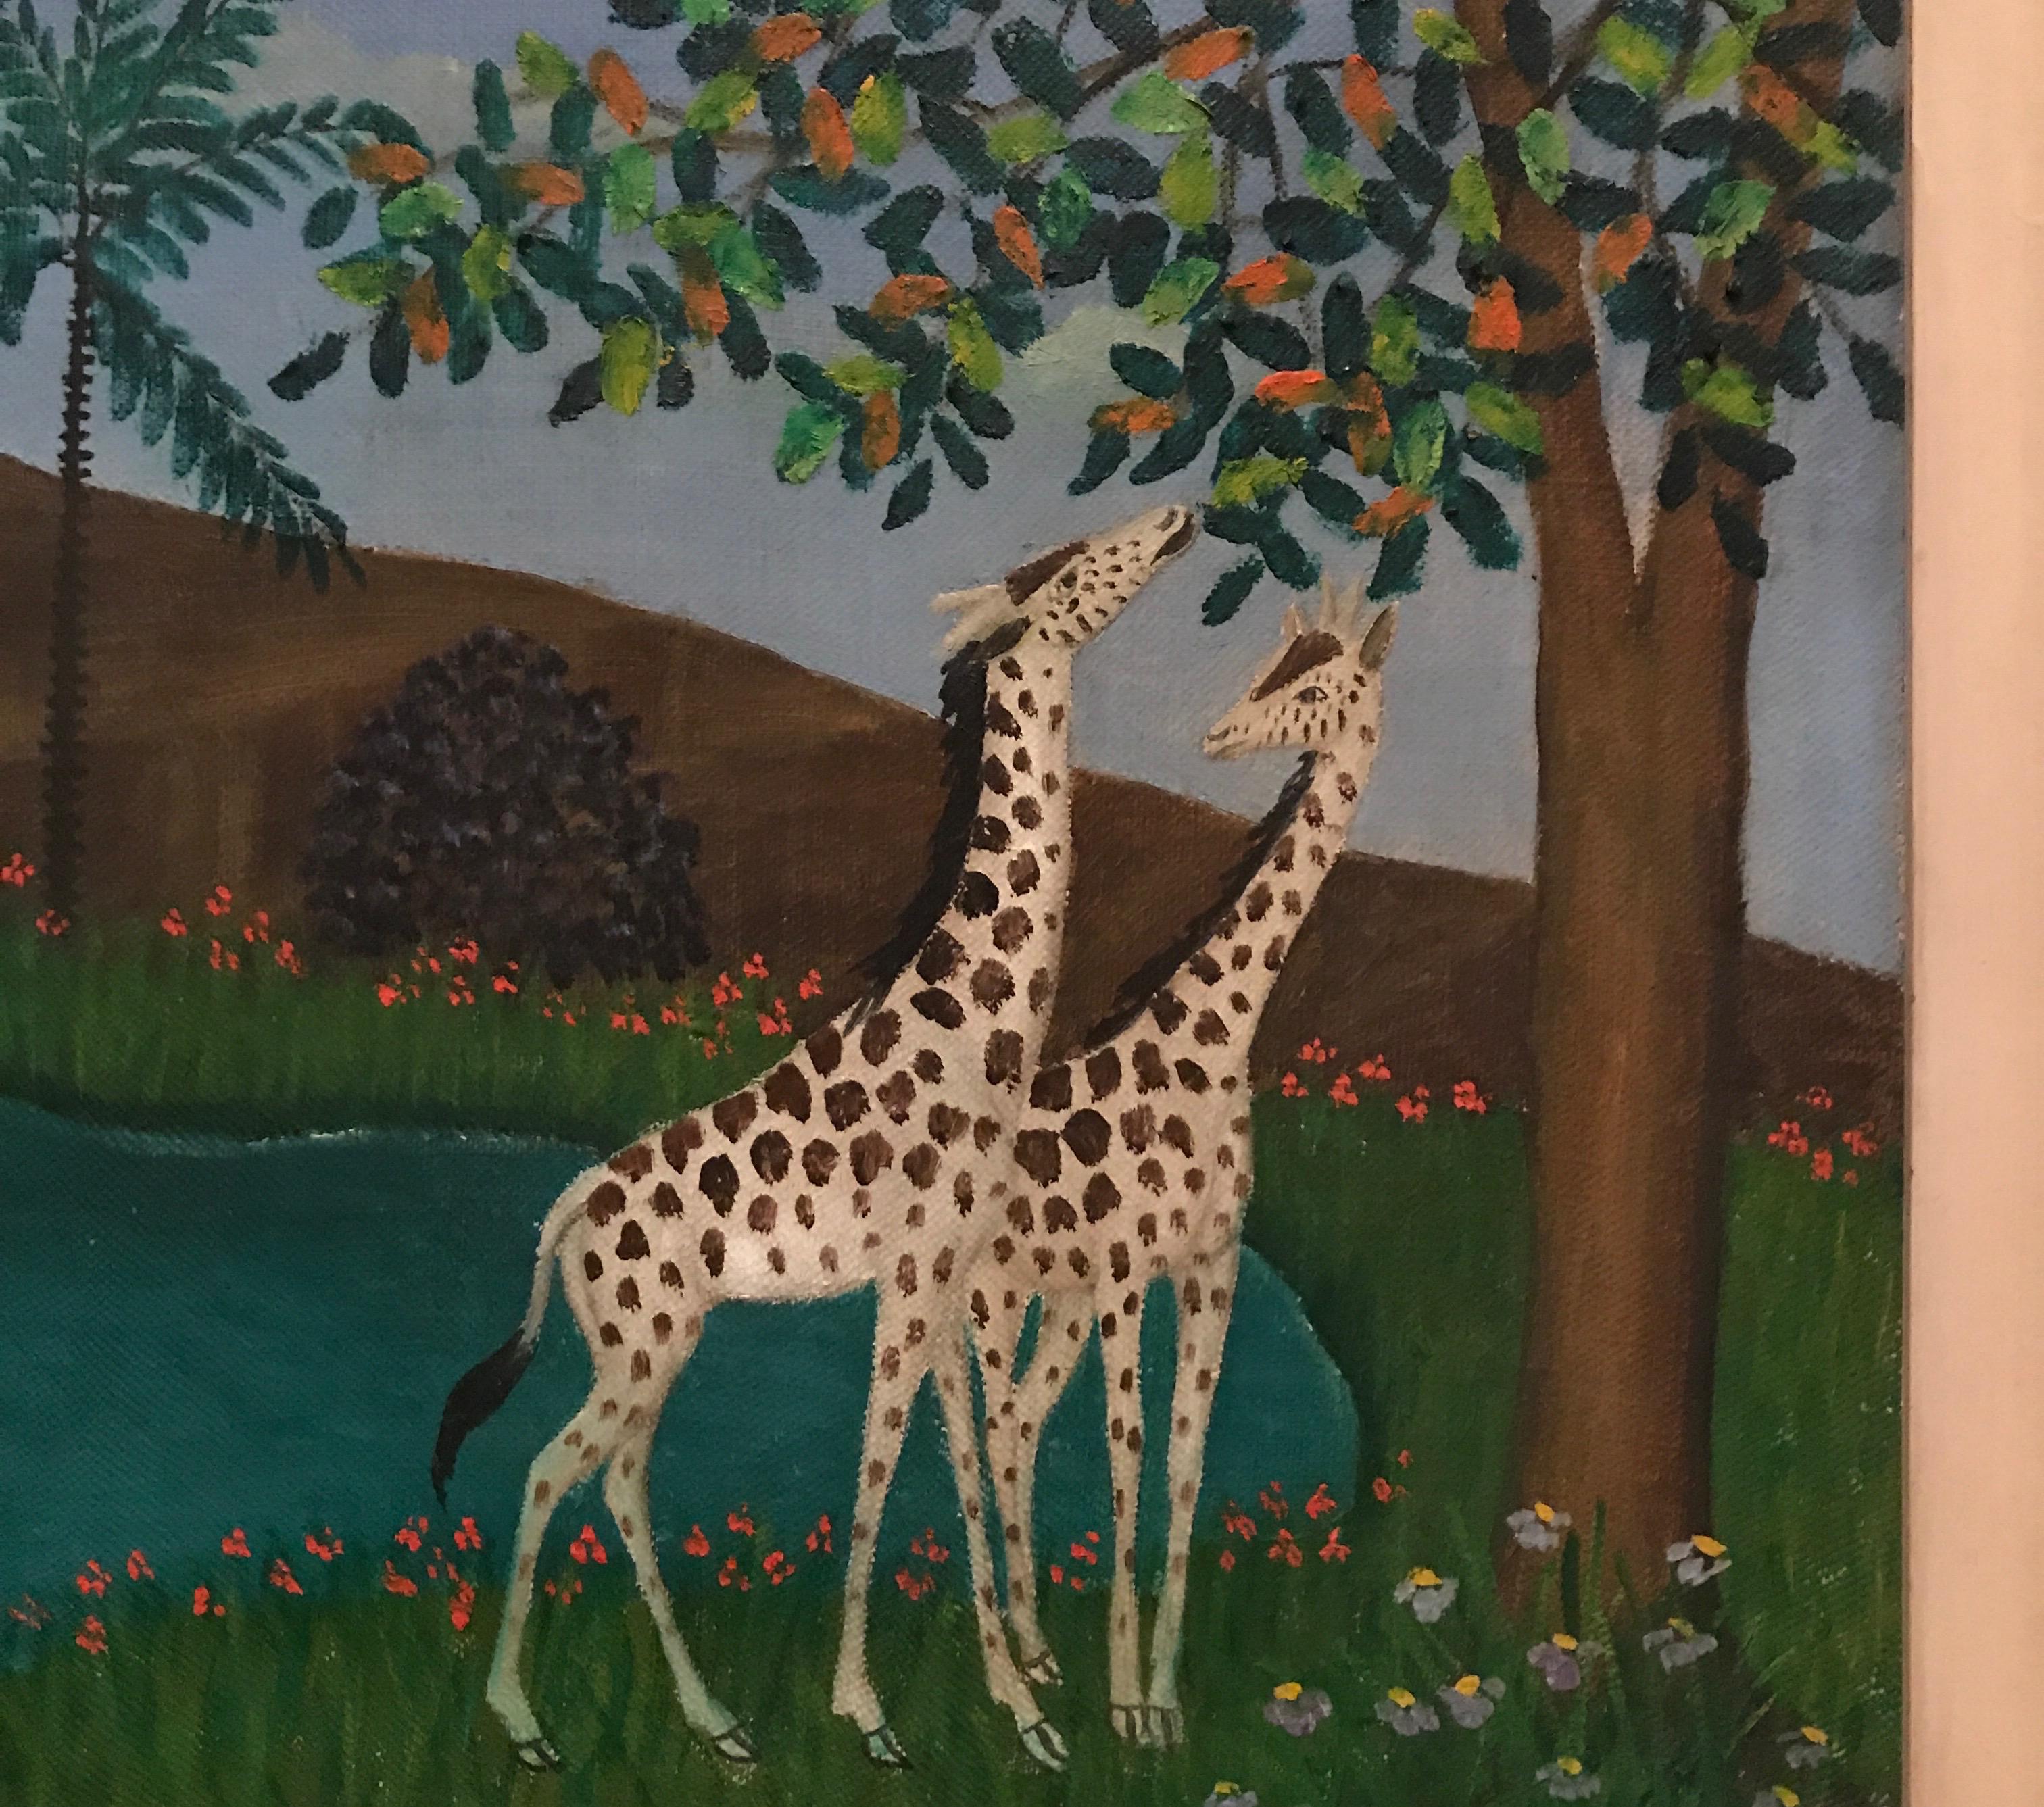 Beautiful original landscape painting featuring a pair of giraffe's grazing in charming tropical setting. Size of image is 9.25 x 10.5.